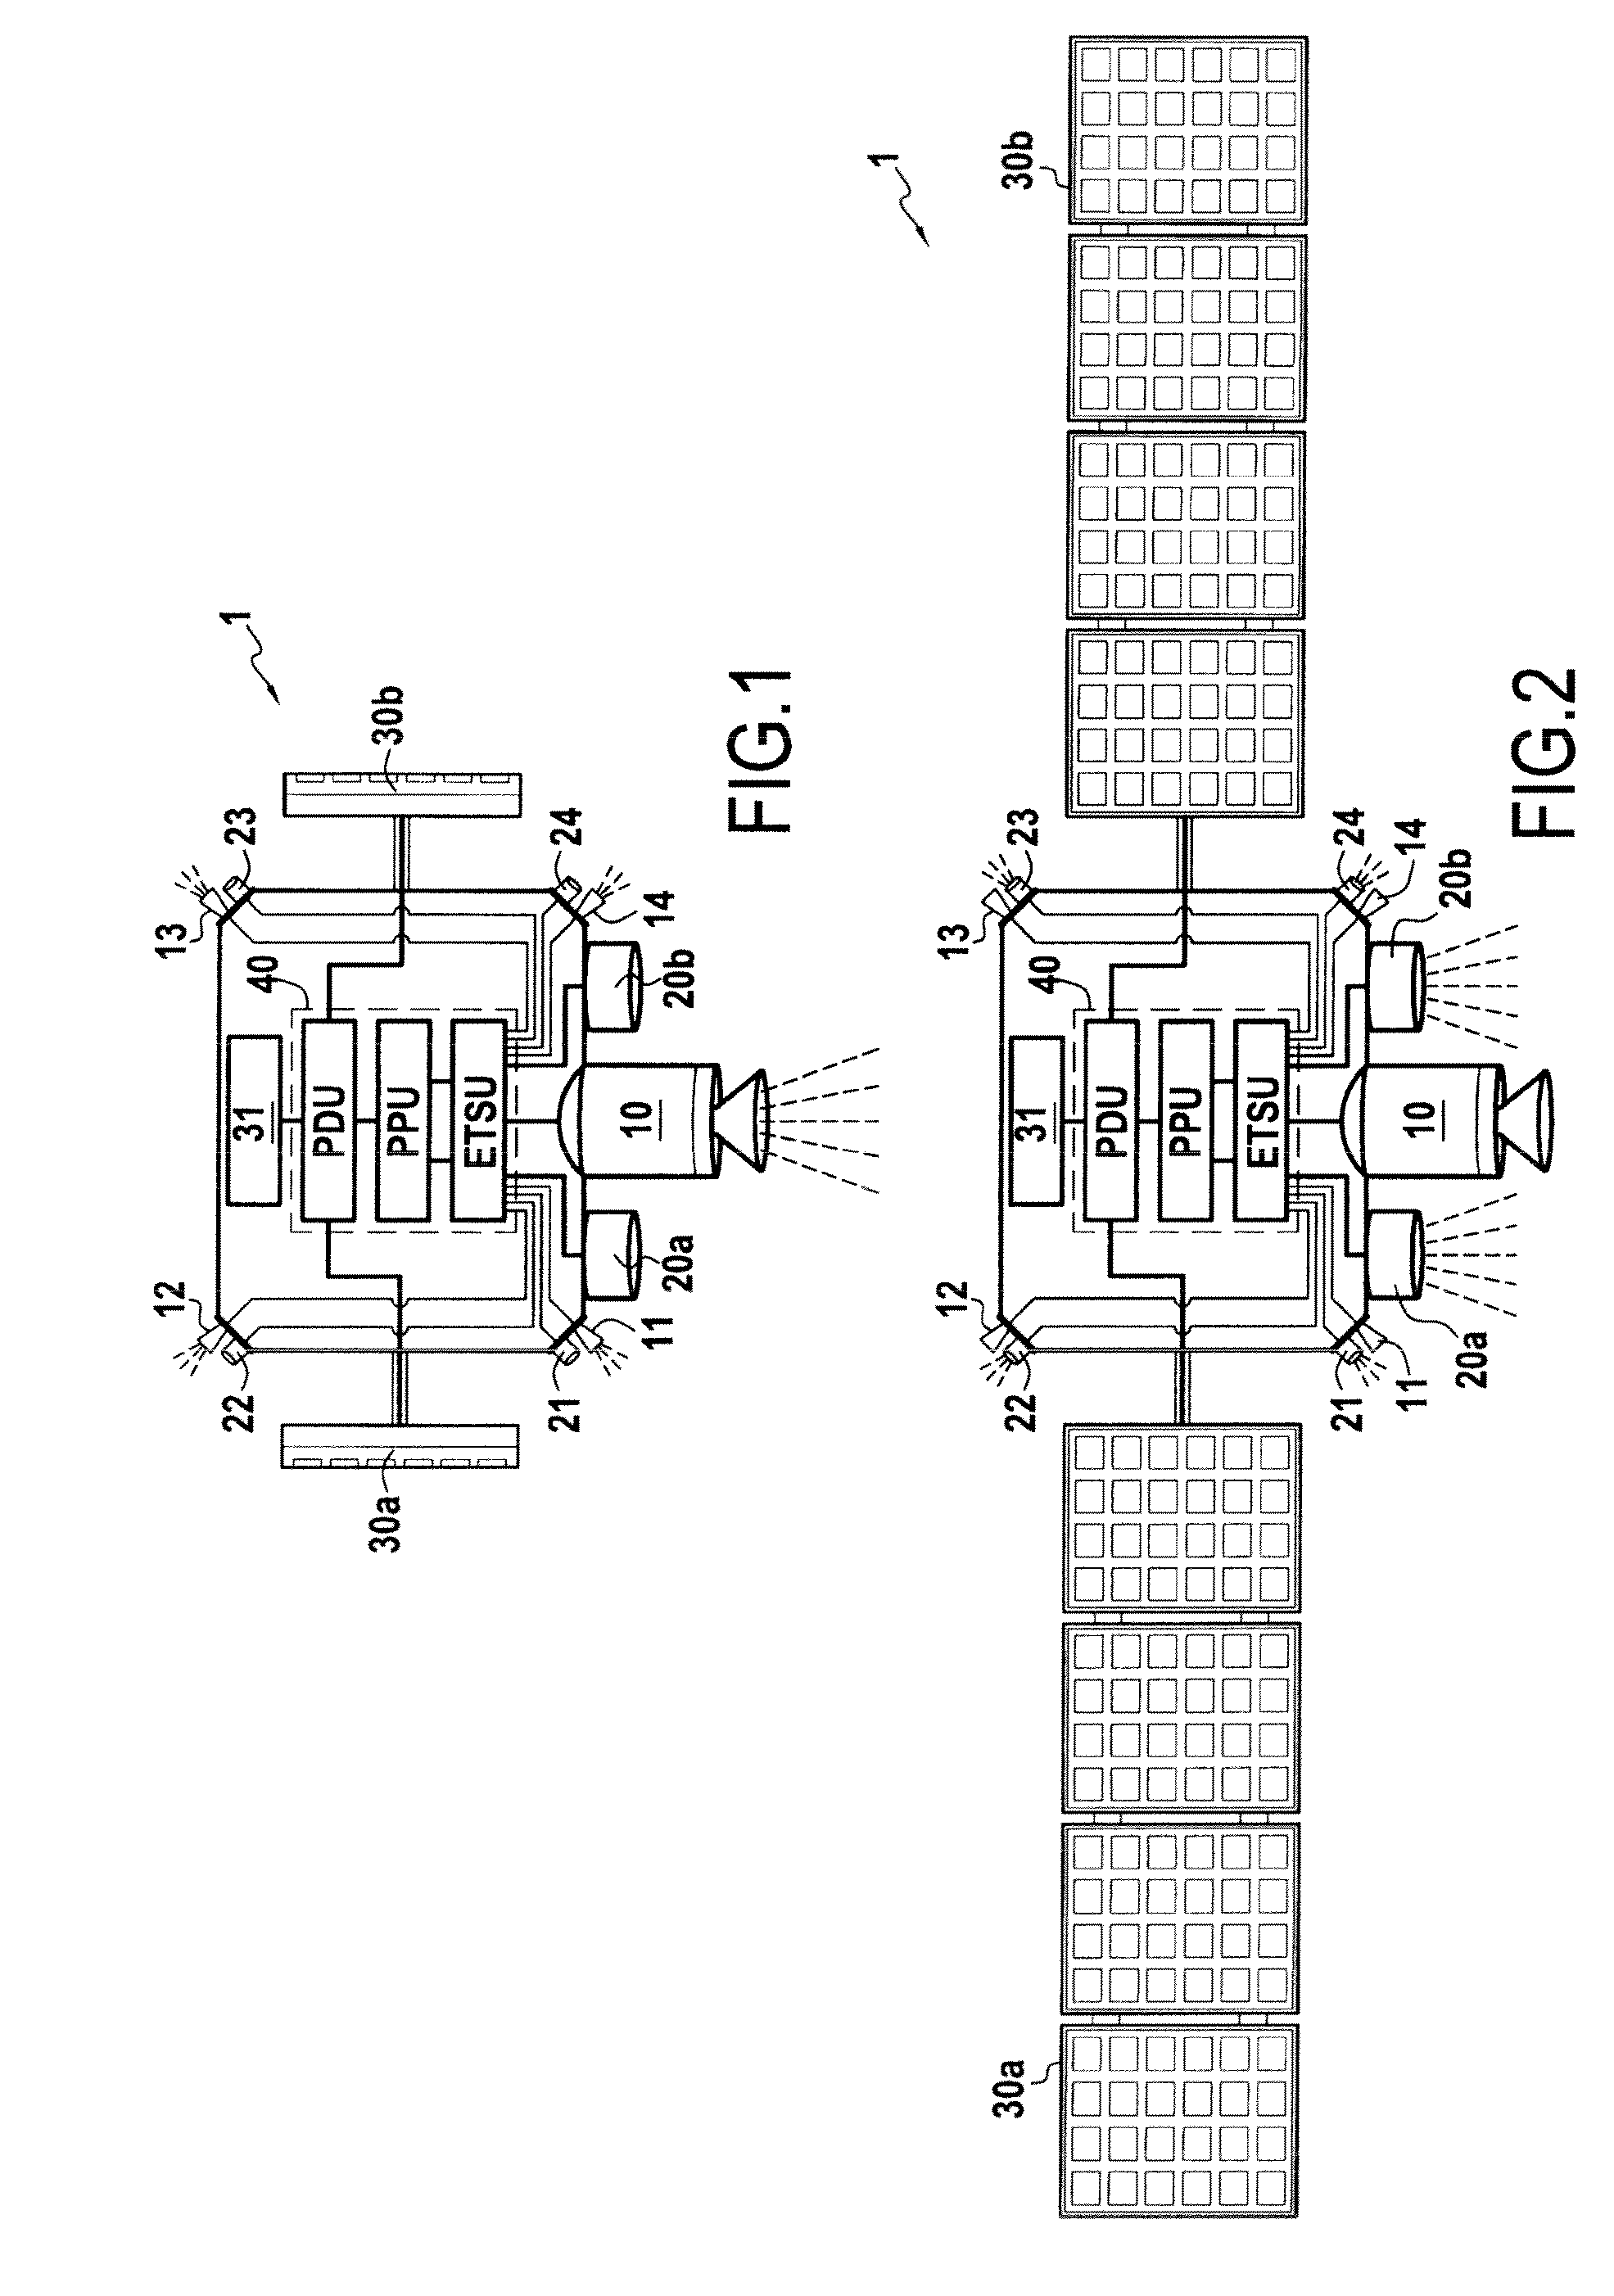 Space vehicle with electric propulsion and solid propellant chemical propulsion